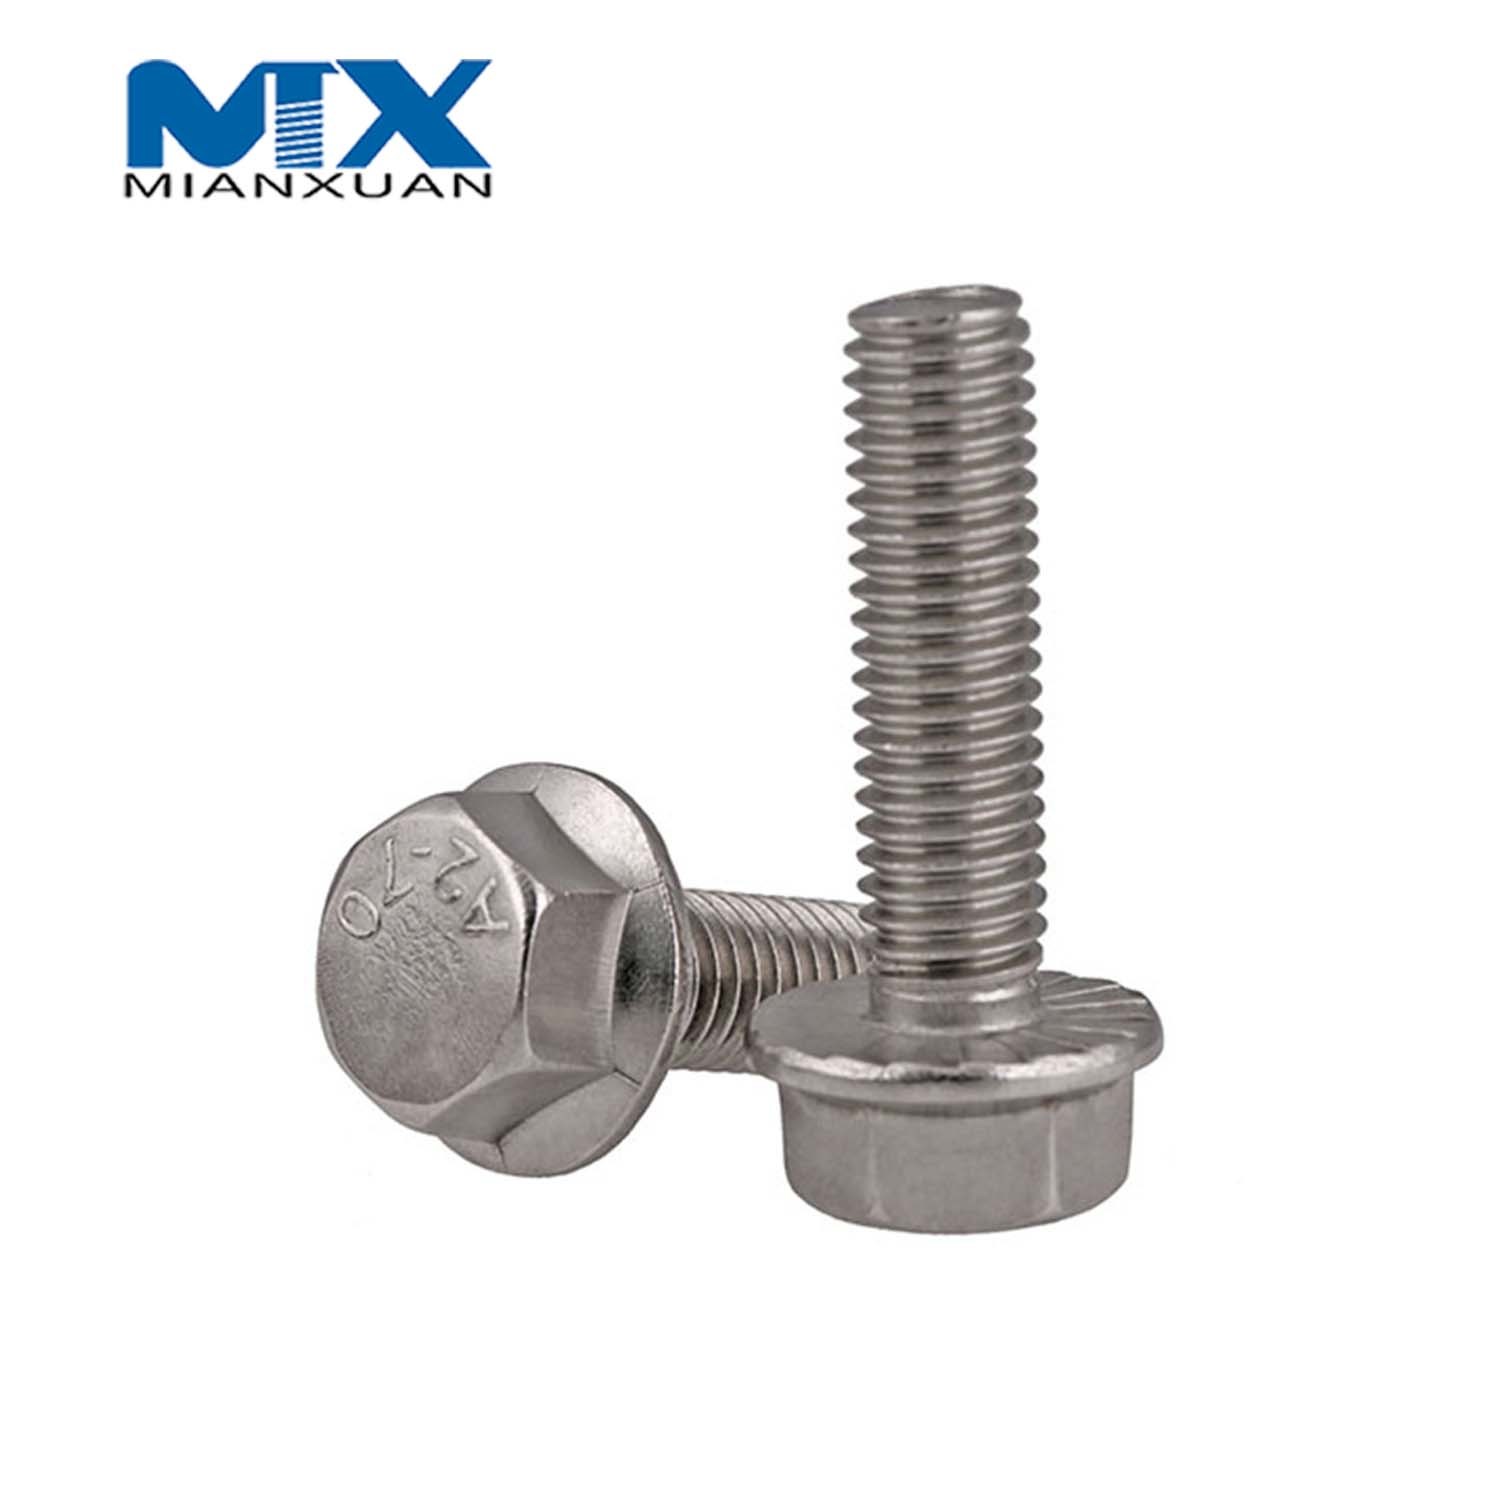 DIN6921 Hex Head Bolt Knurled No-Knurled Stainless Steel